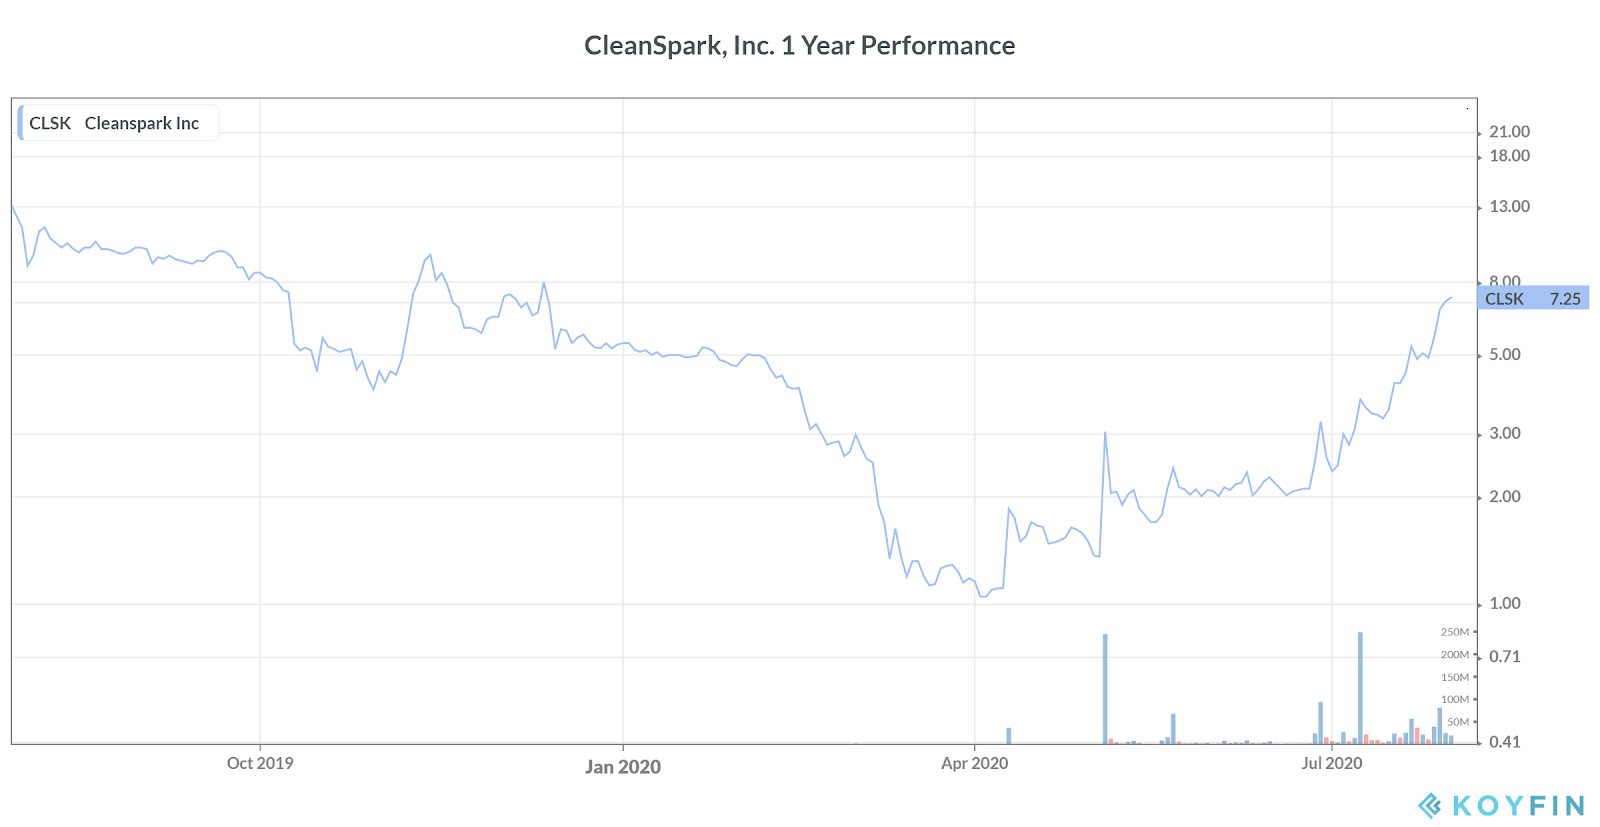 cleanspark stock price